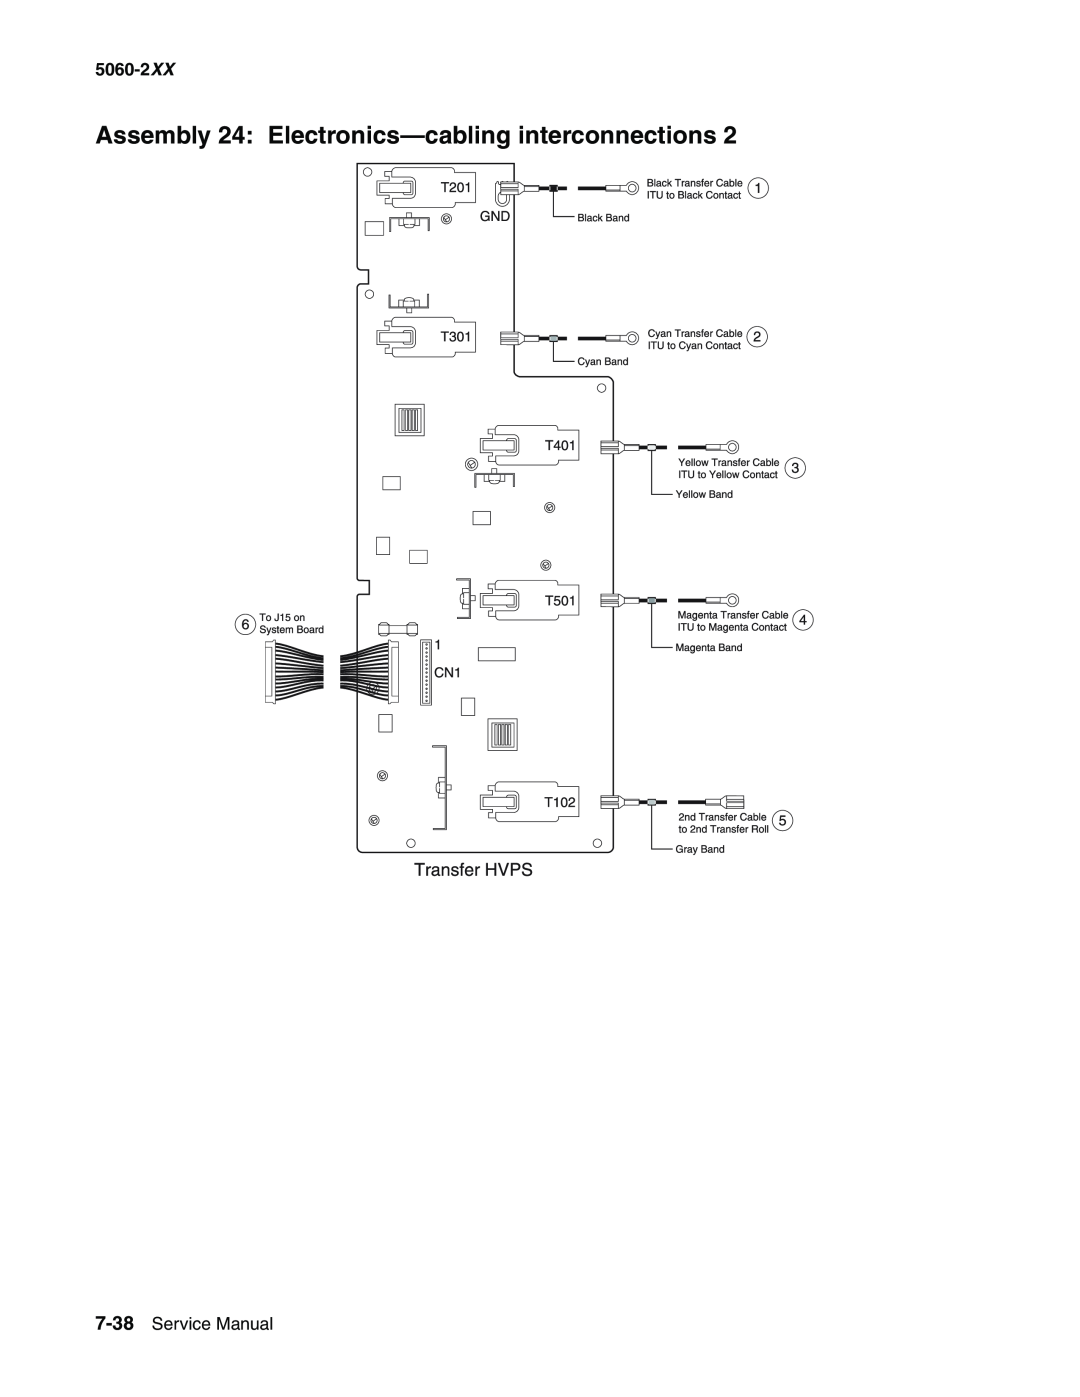 Lexmark 5060-2XX manual Assembly 24 Electronics-cabling interconnections, Service Manual 